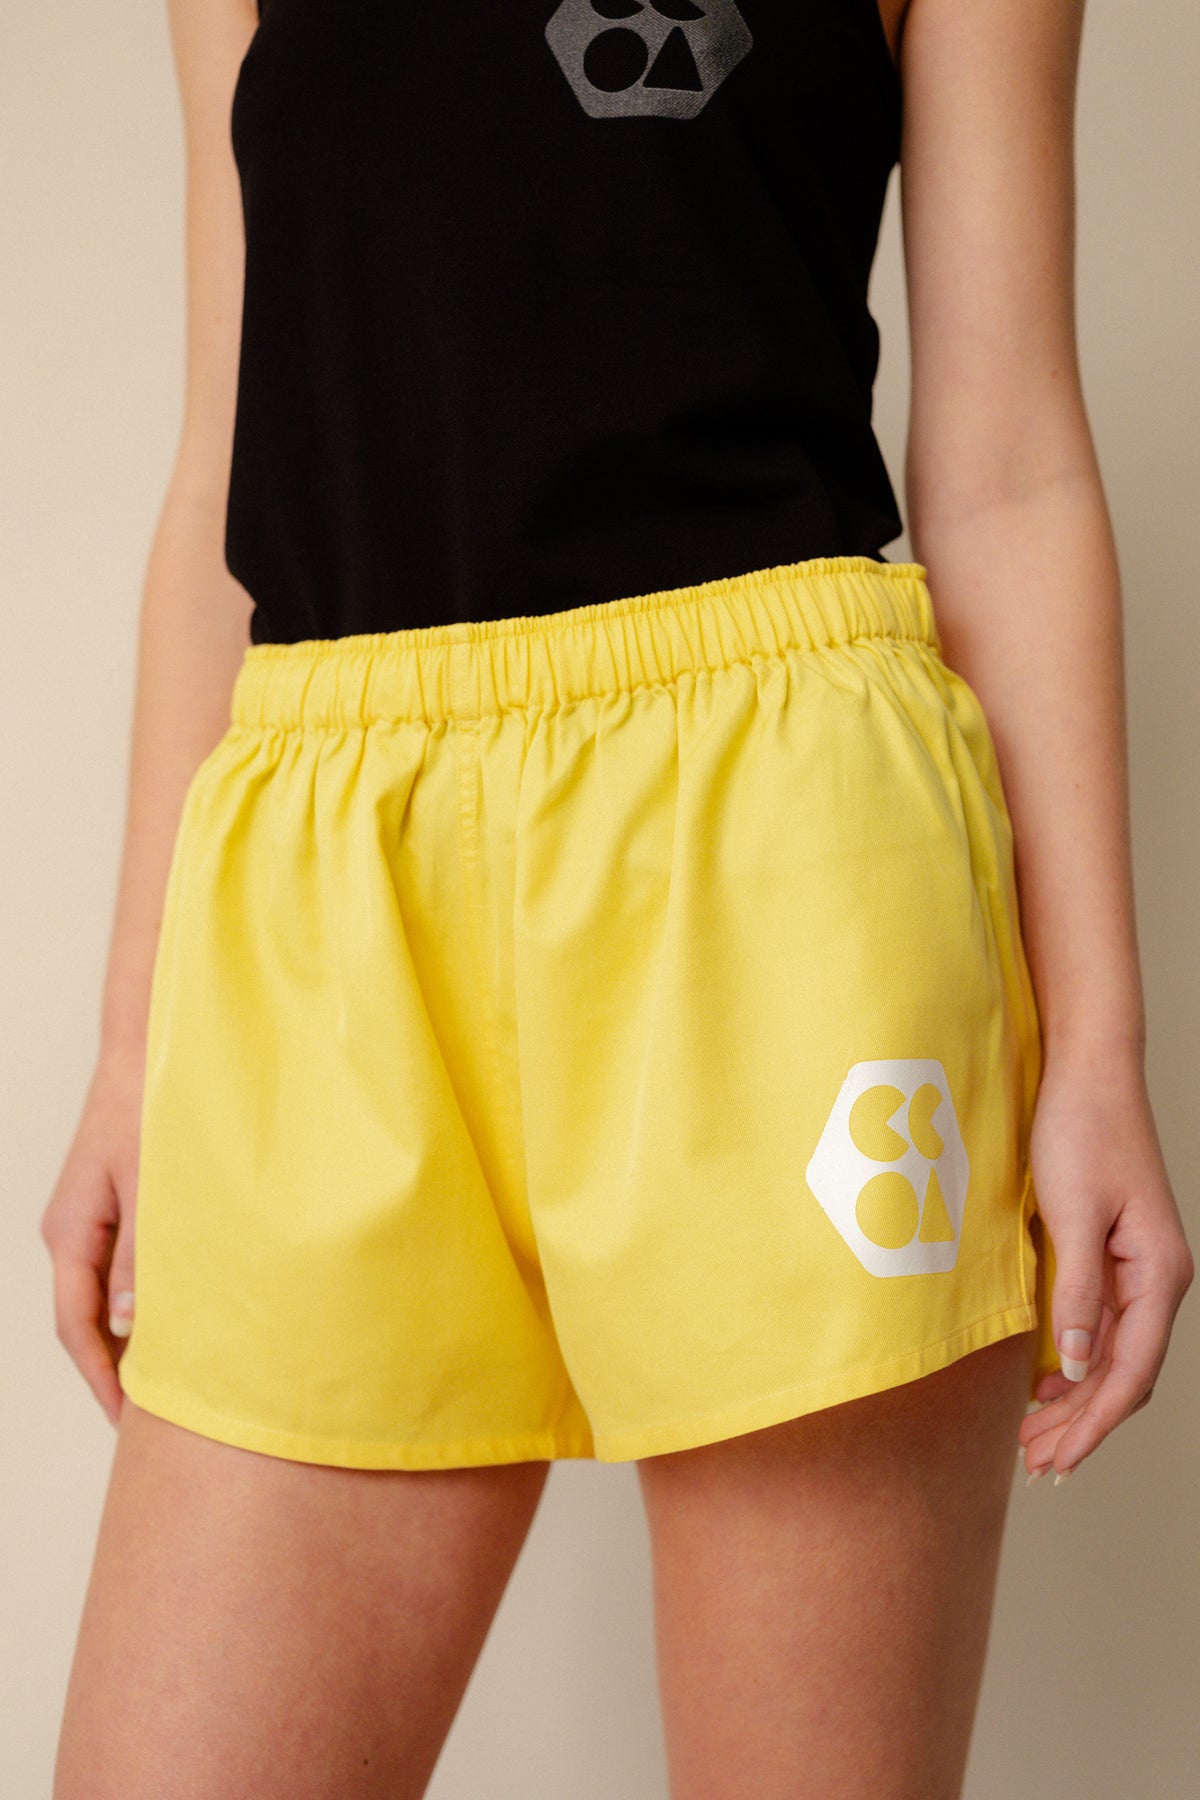 
            Shot of white, slim female from shoulder to thigh wearing lightweight sports short plastic free canary yellow with white CCOA logo